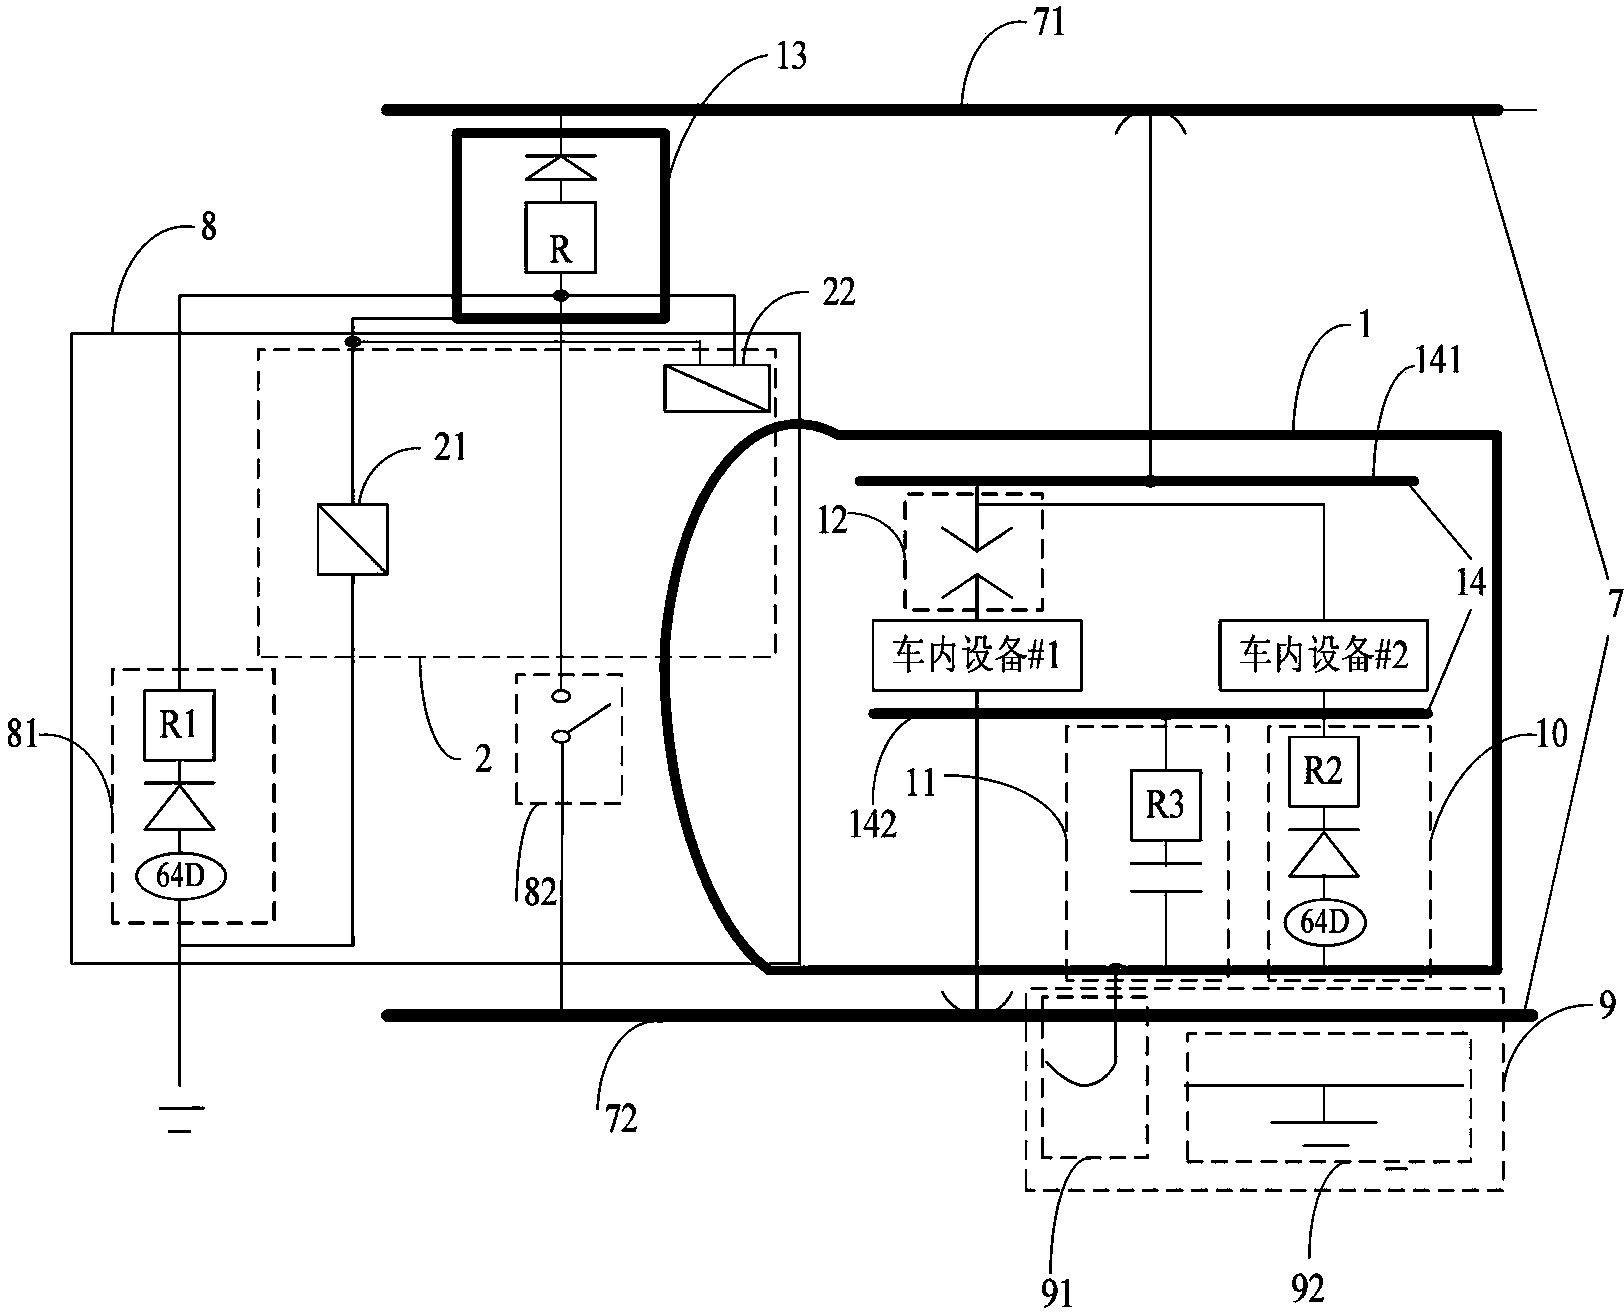 Integrated grounding system for medium-and-low-speed maglev train